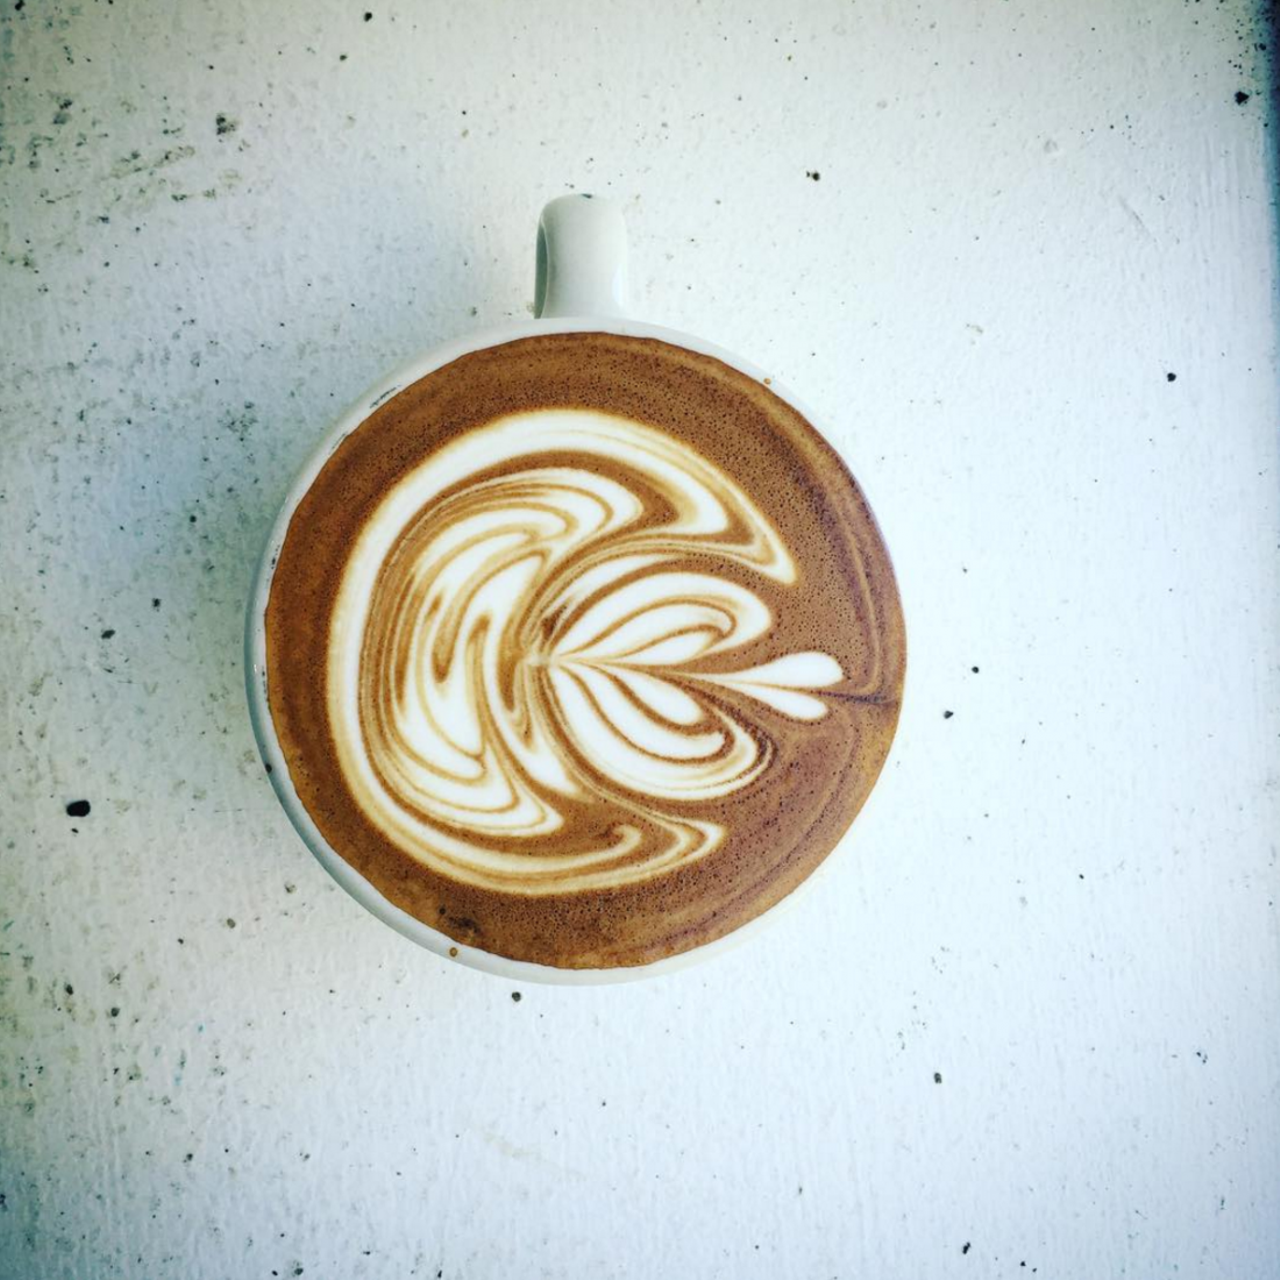 Phoenix Coffee Company
With four locations, Phoenix Coffee Co. has been caffeinating Clevelanders for over two decades -- and now their Instagram is also satisfying our desire for aesthetically pleasing latte art. (Photo via @phoenixcoffeeco)